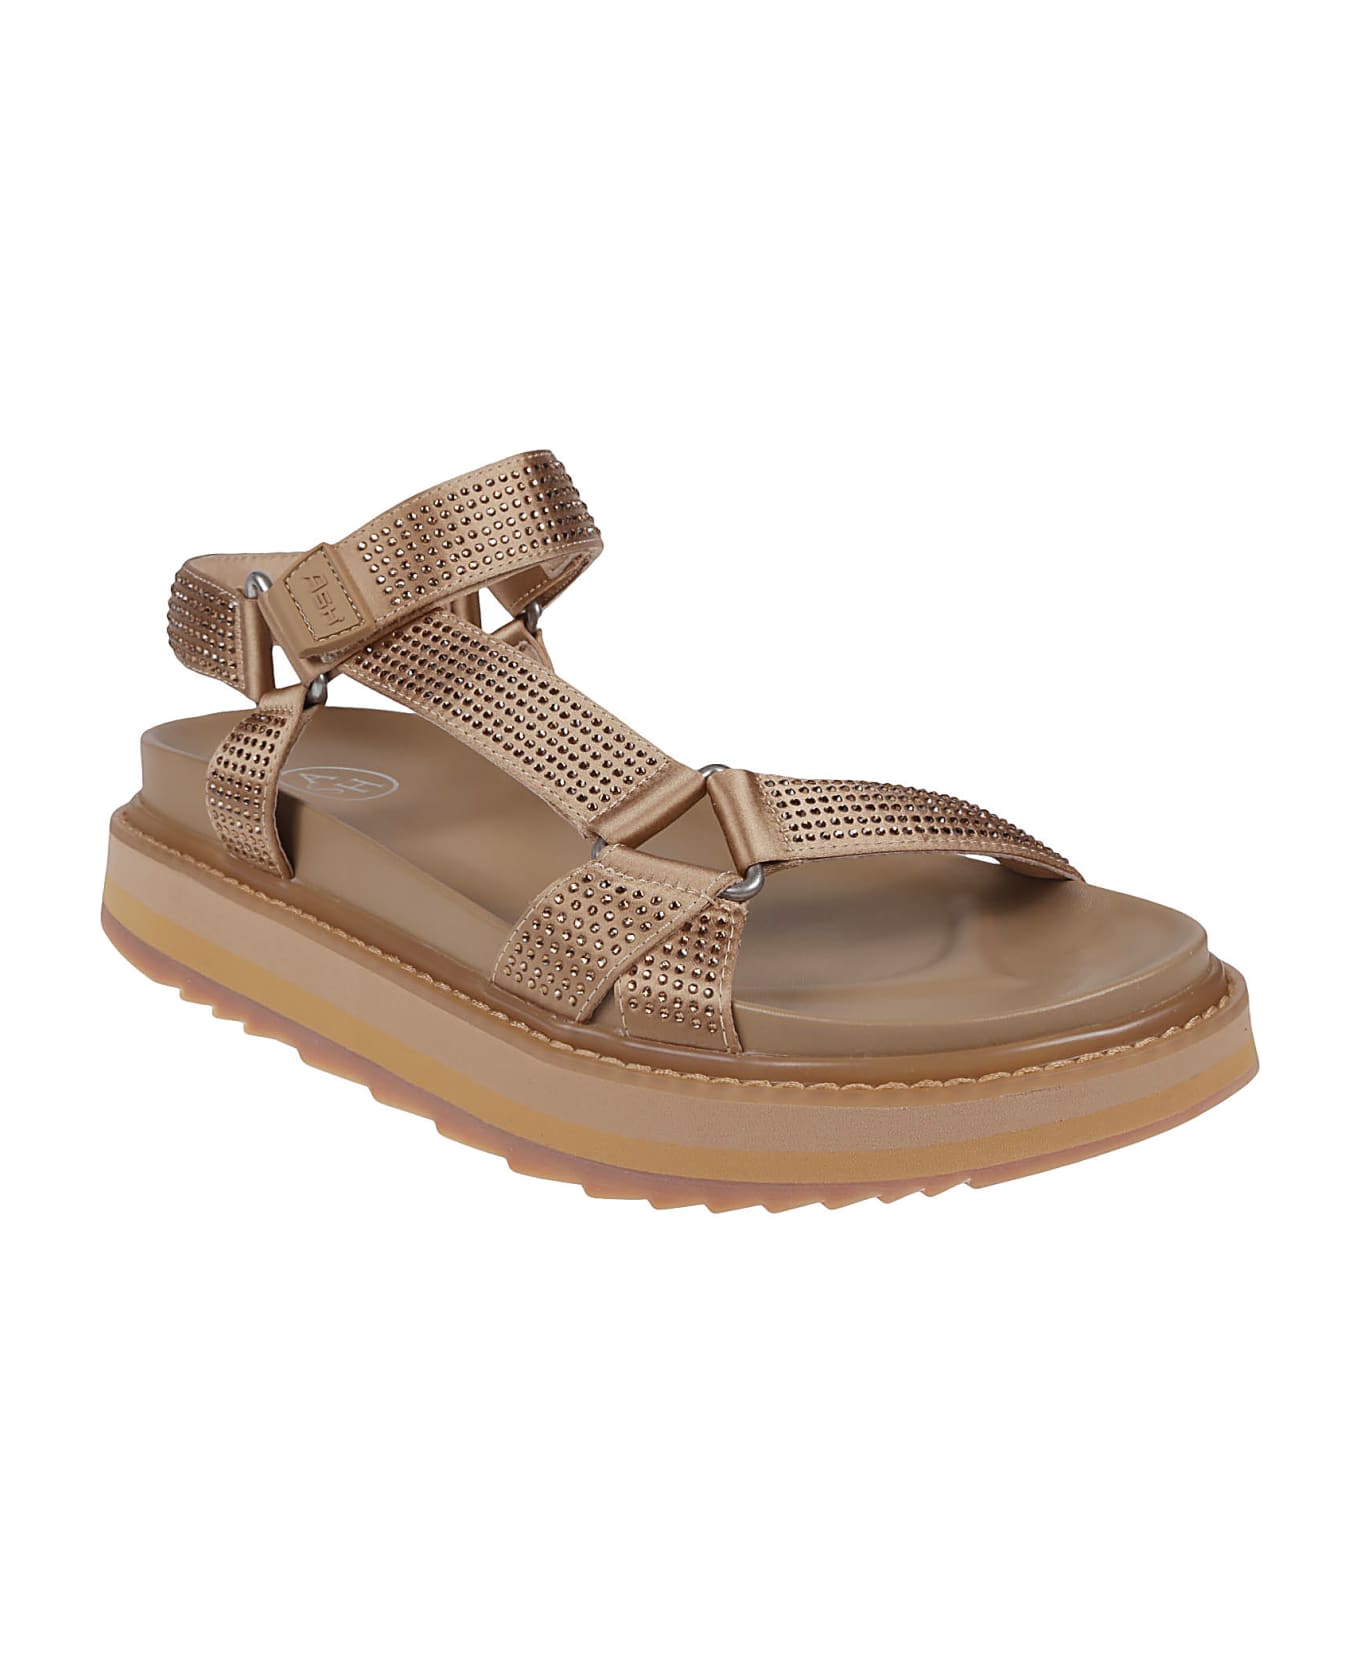 Ash Ugostrass Sandals - Nude